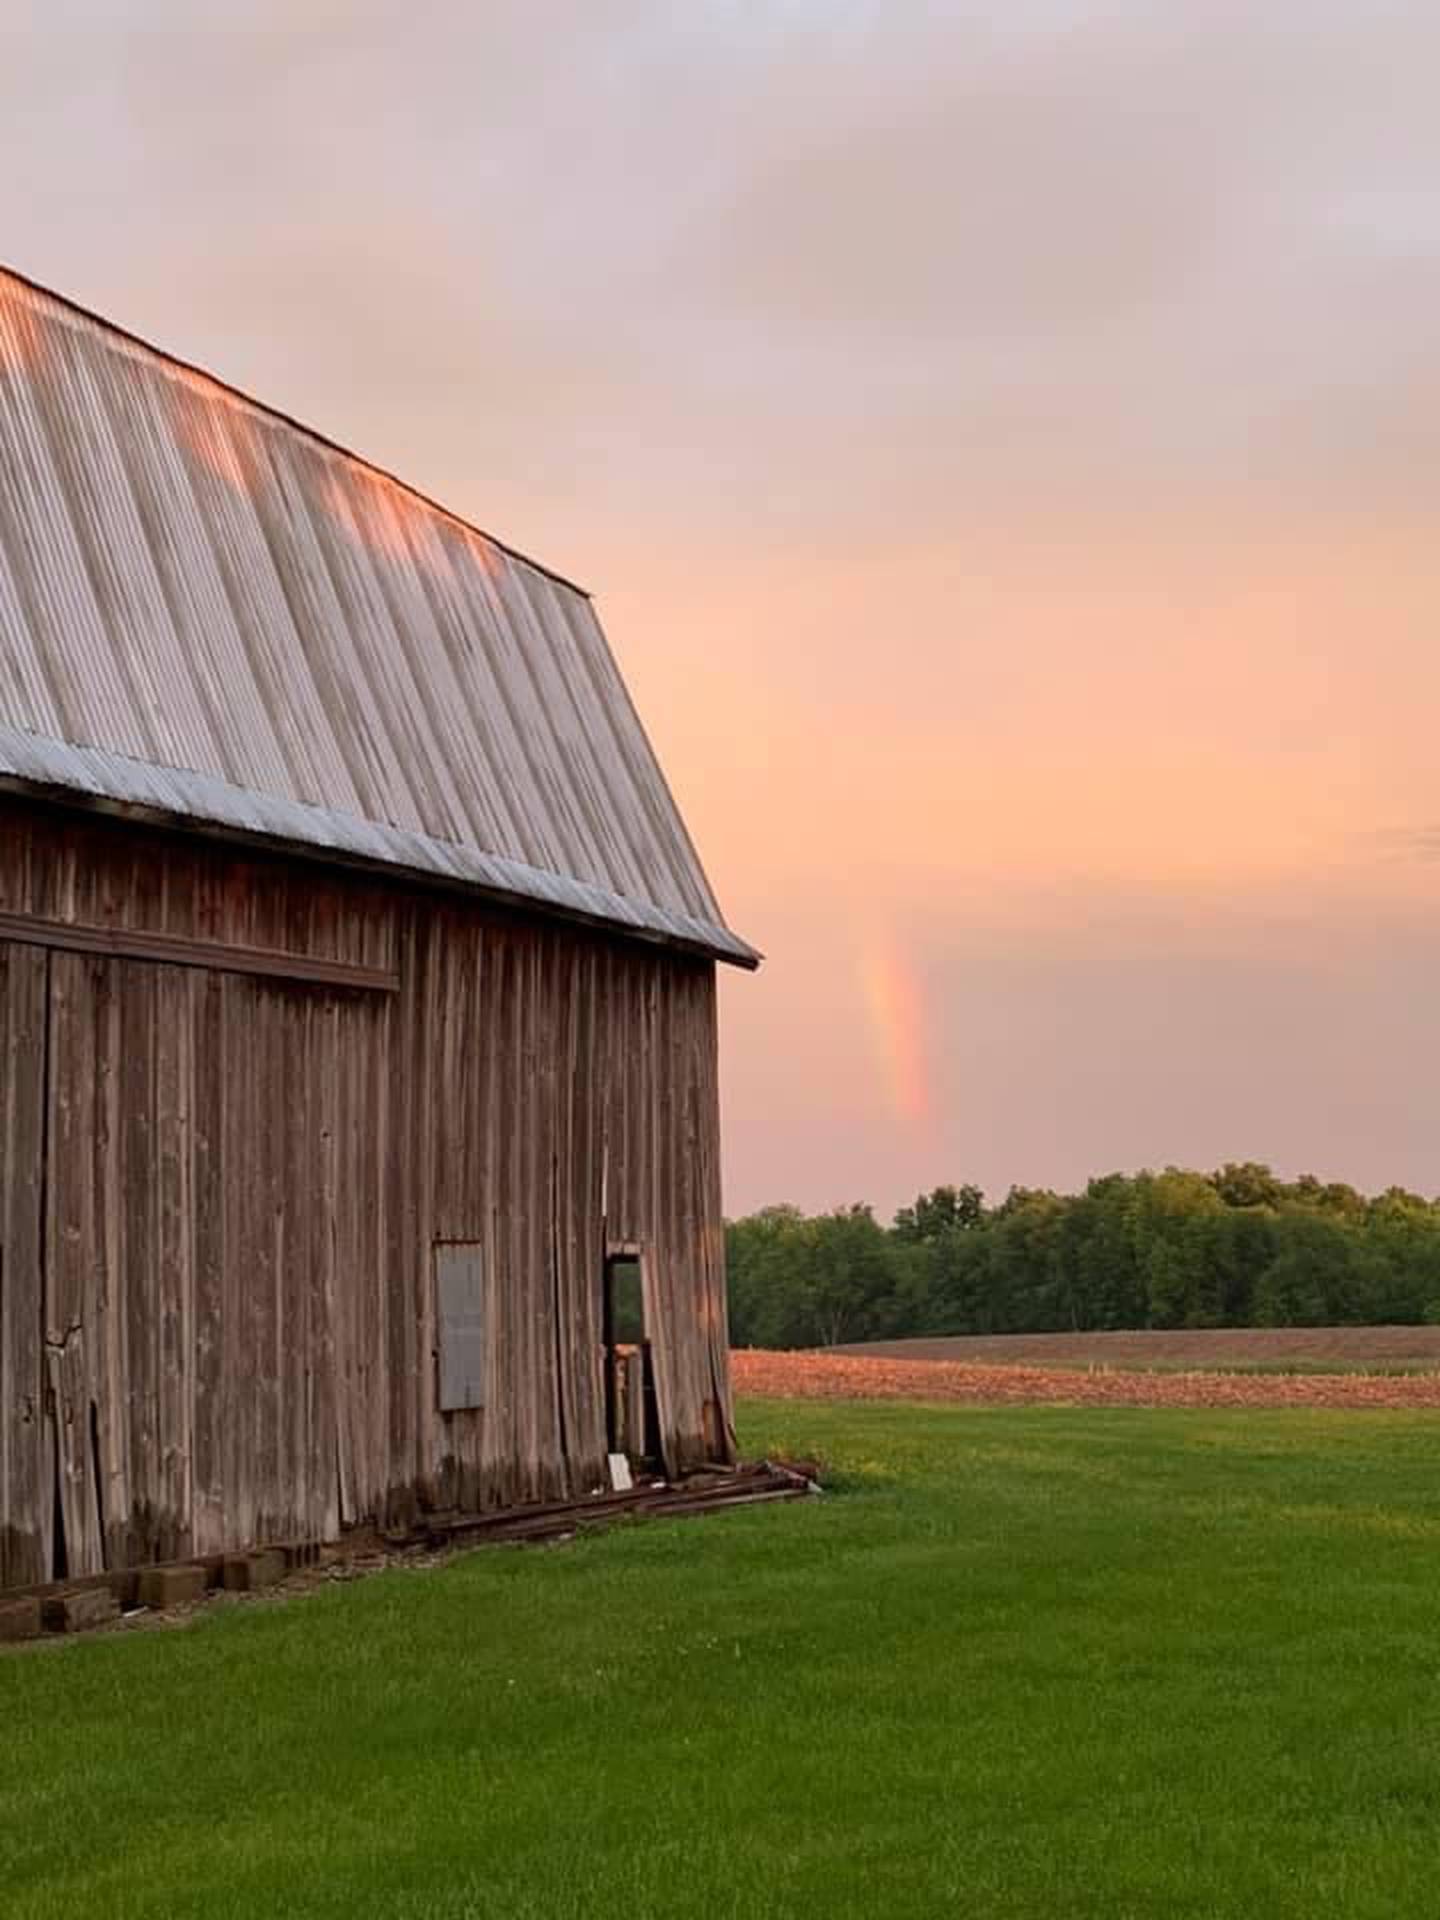 “Barn” — Kimberly Mahr: “Country at its best.”